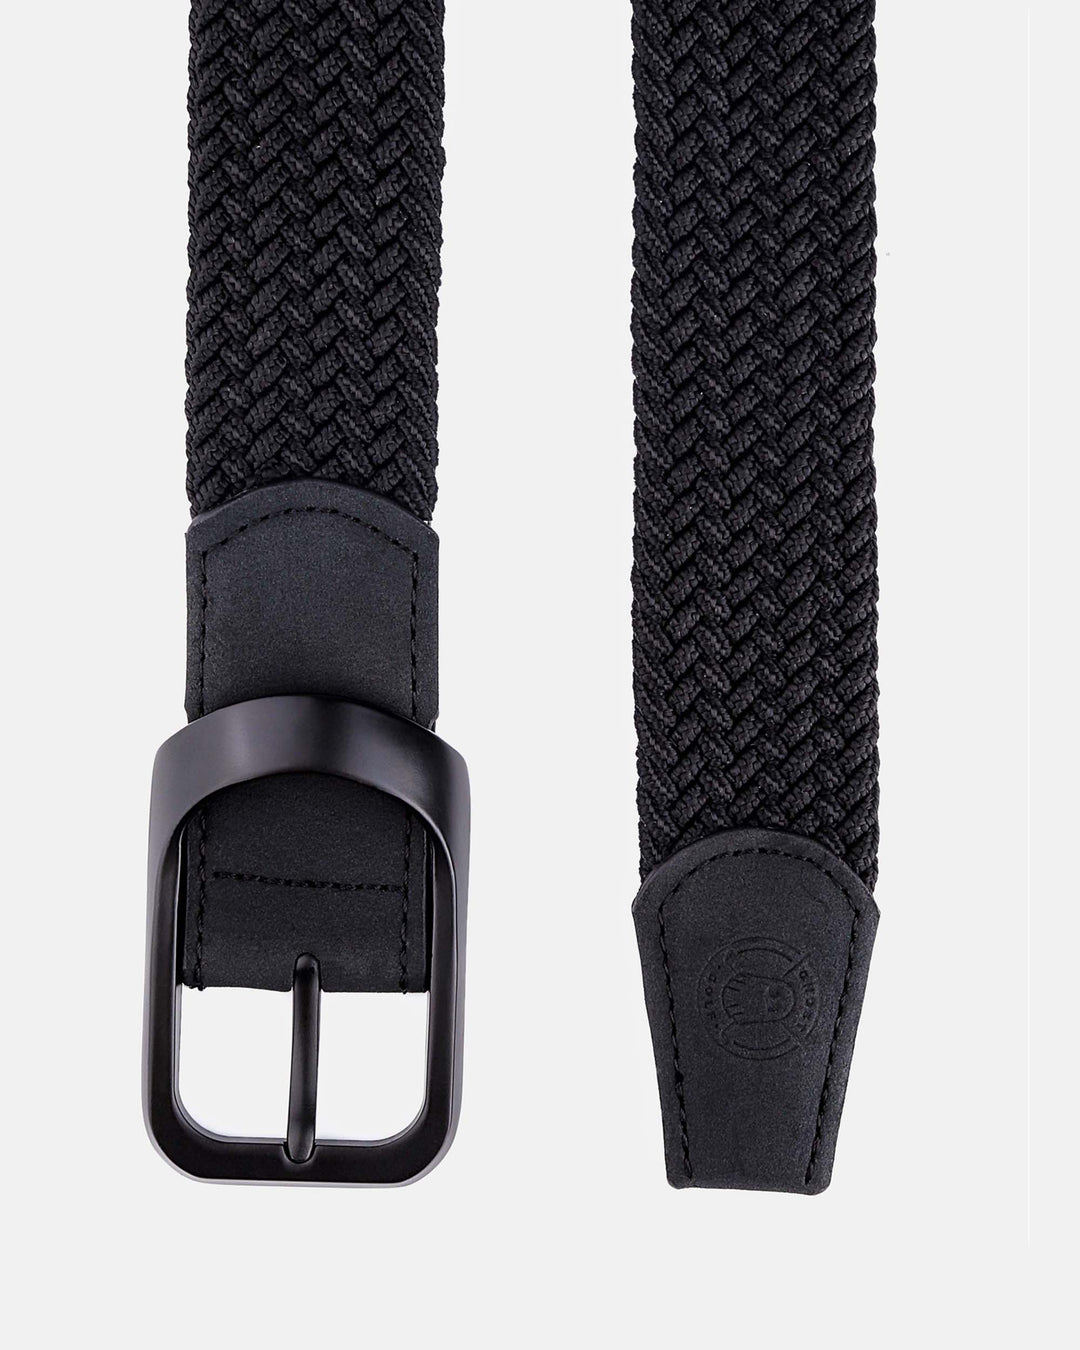 Ghost Golf Black Belt with Black Buckle and Black Leather Tail